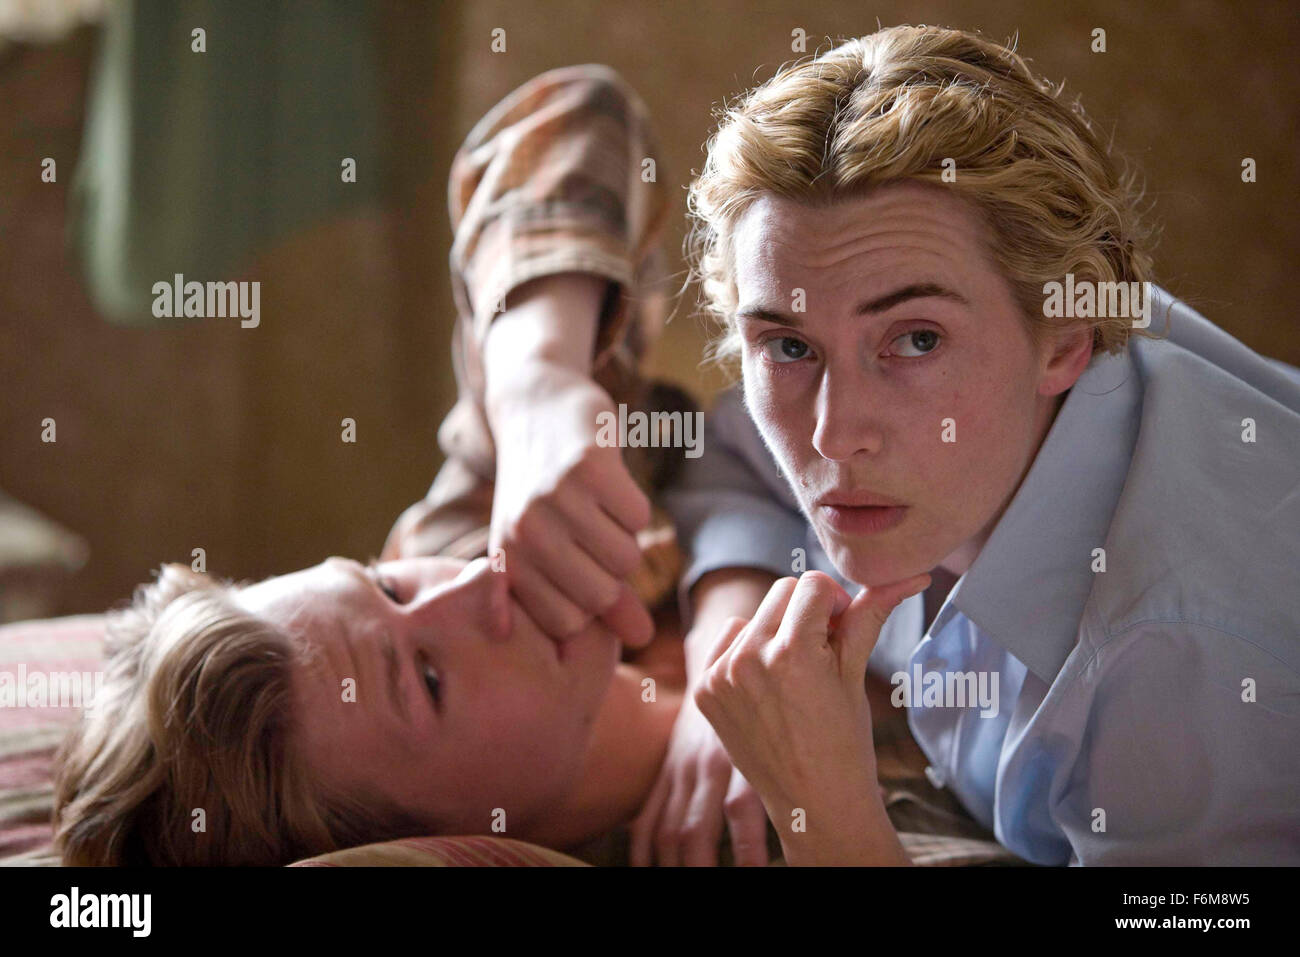 RELEASE DATE: January 9, 2009 . MOVIE TITLE: The Reader. STUDIO: The Weinstein Company. PLOT: In postwar Germany, a young man's decades-long obsession with an older woman runs headlong into a war crimes trial, where he learns an awful truth. PICTURED: KATE WINSLET as Hanna Schmitz and DAVID KROSS as Michael. Stock Photo